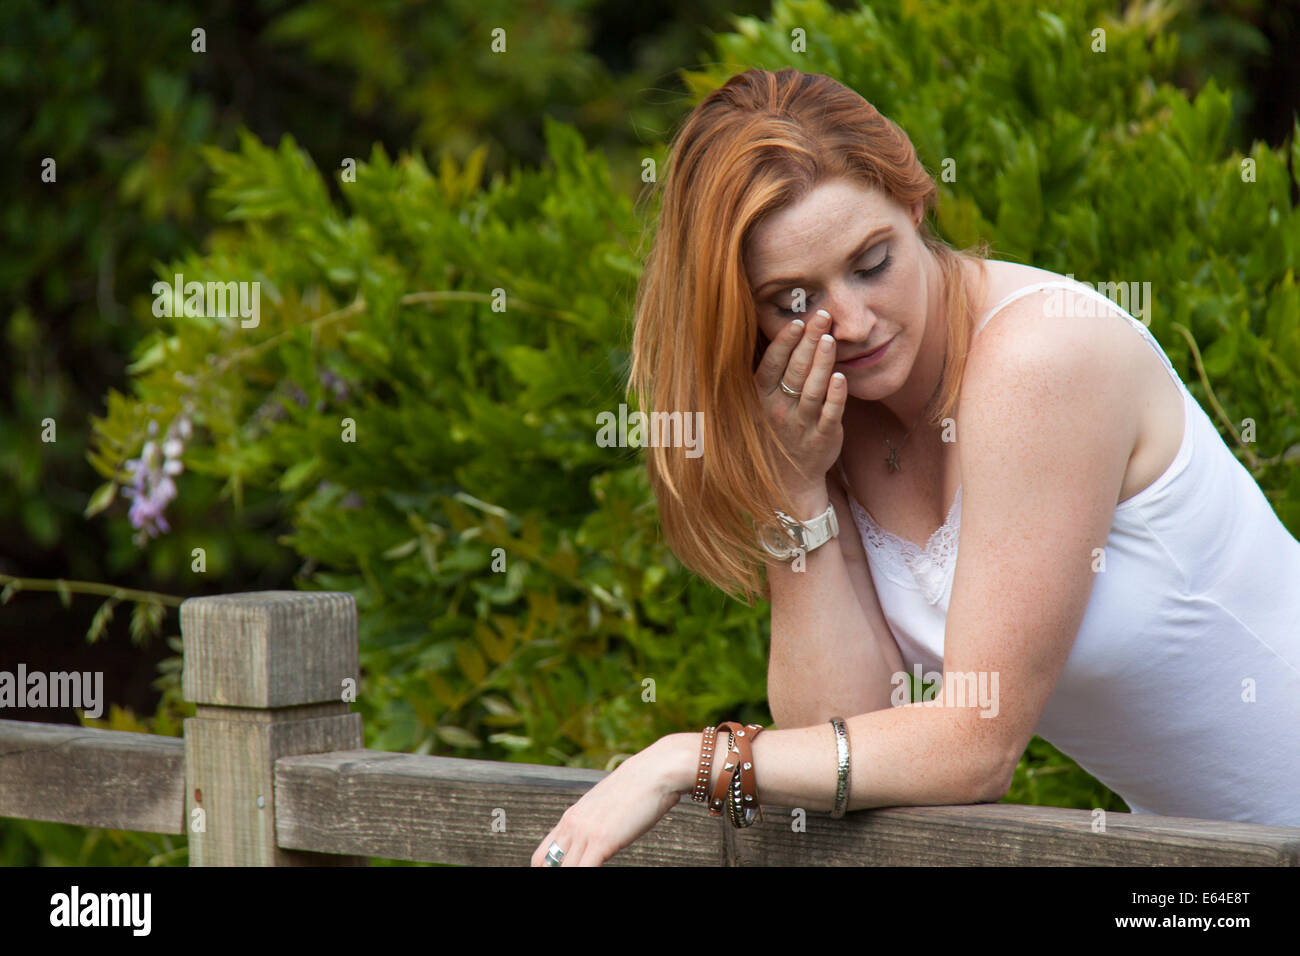 A red haired young girl crying by a bridge Stock Photo